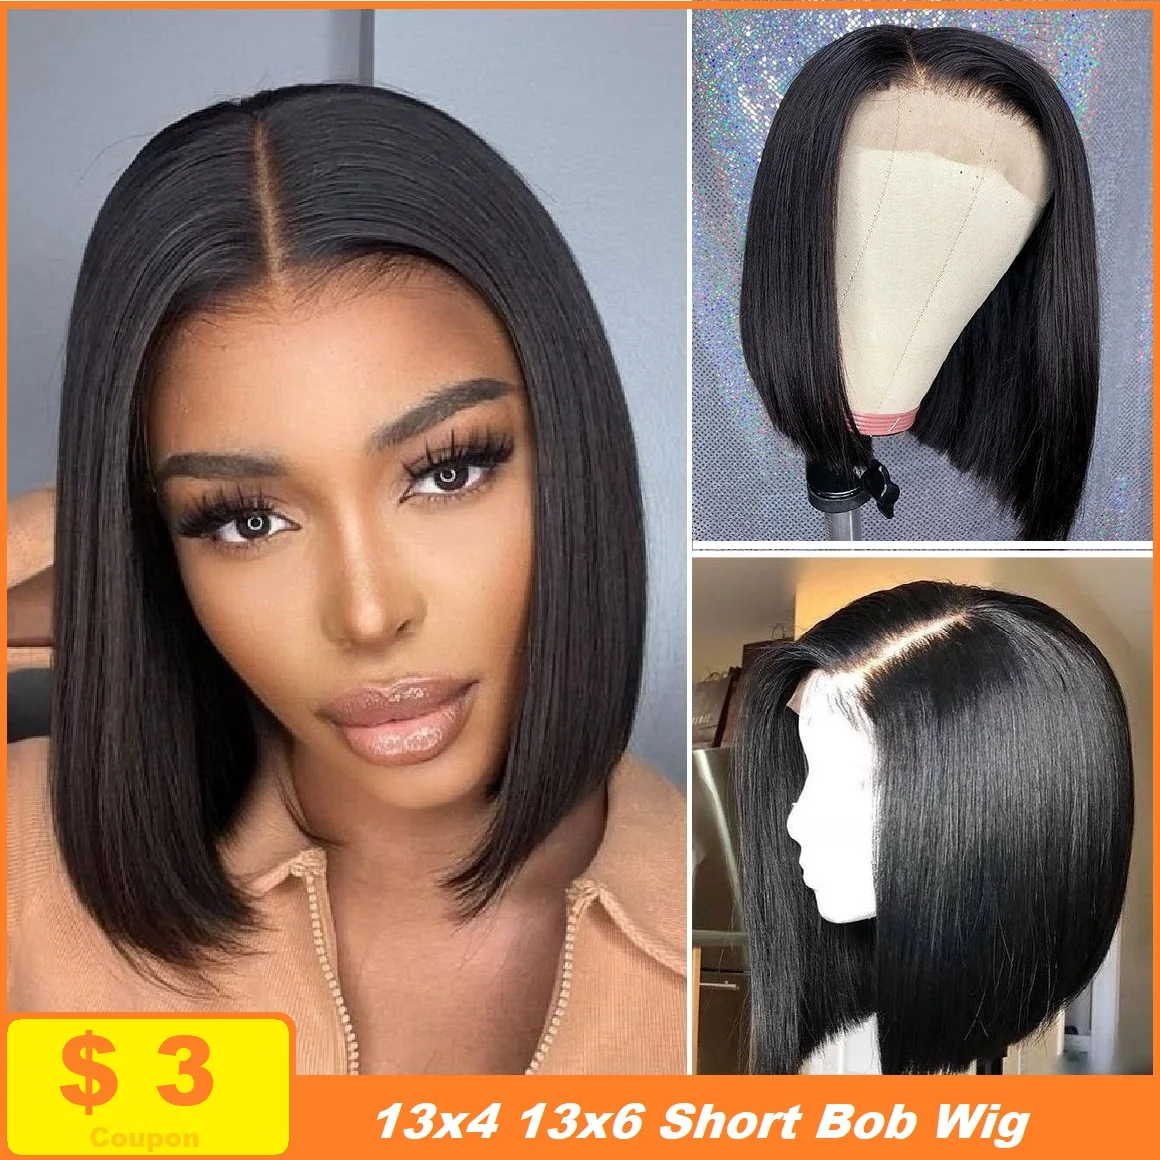 Short Bob Wig 13x6 13x4 Hd Lace Frontal Wig 10A Straight Lace Front Human Hair Wigs For Women Black Wig Bob 100% Human Hair Wig